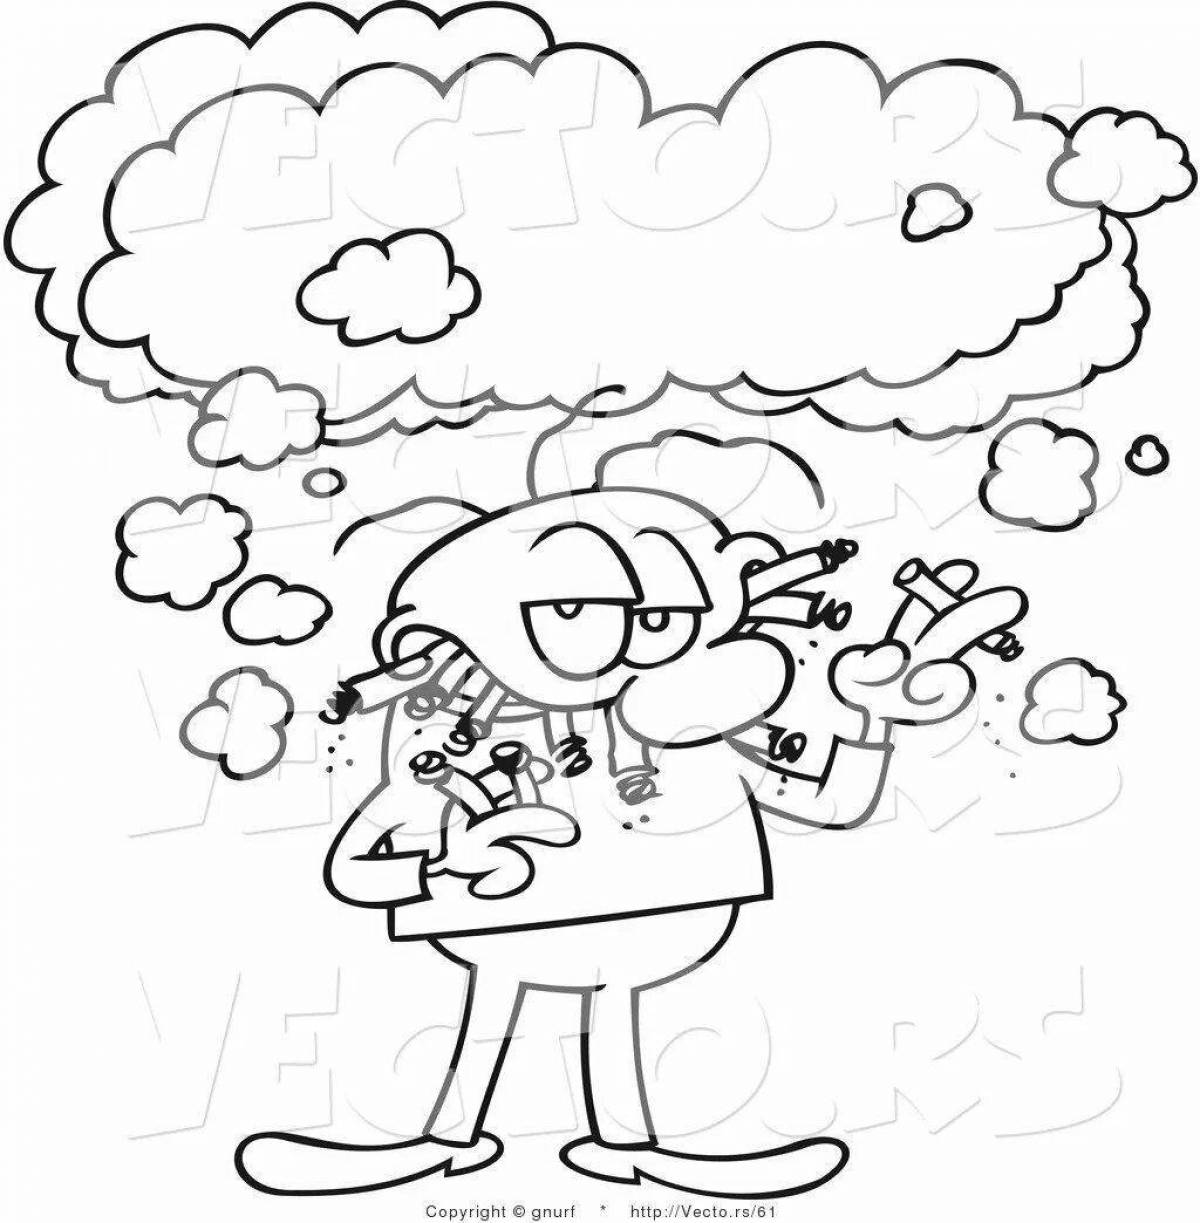 Horrible coloring book about smoking